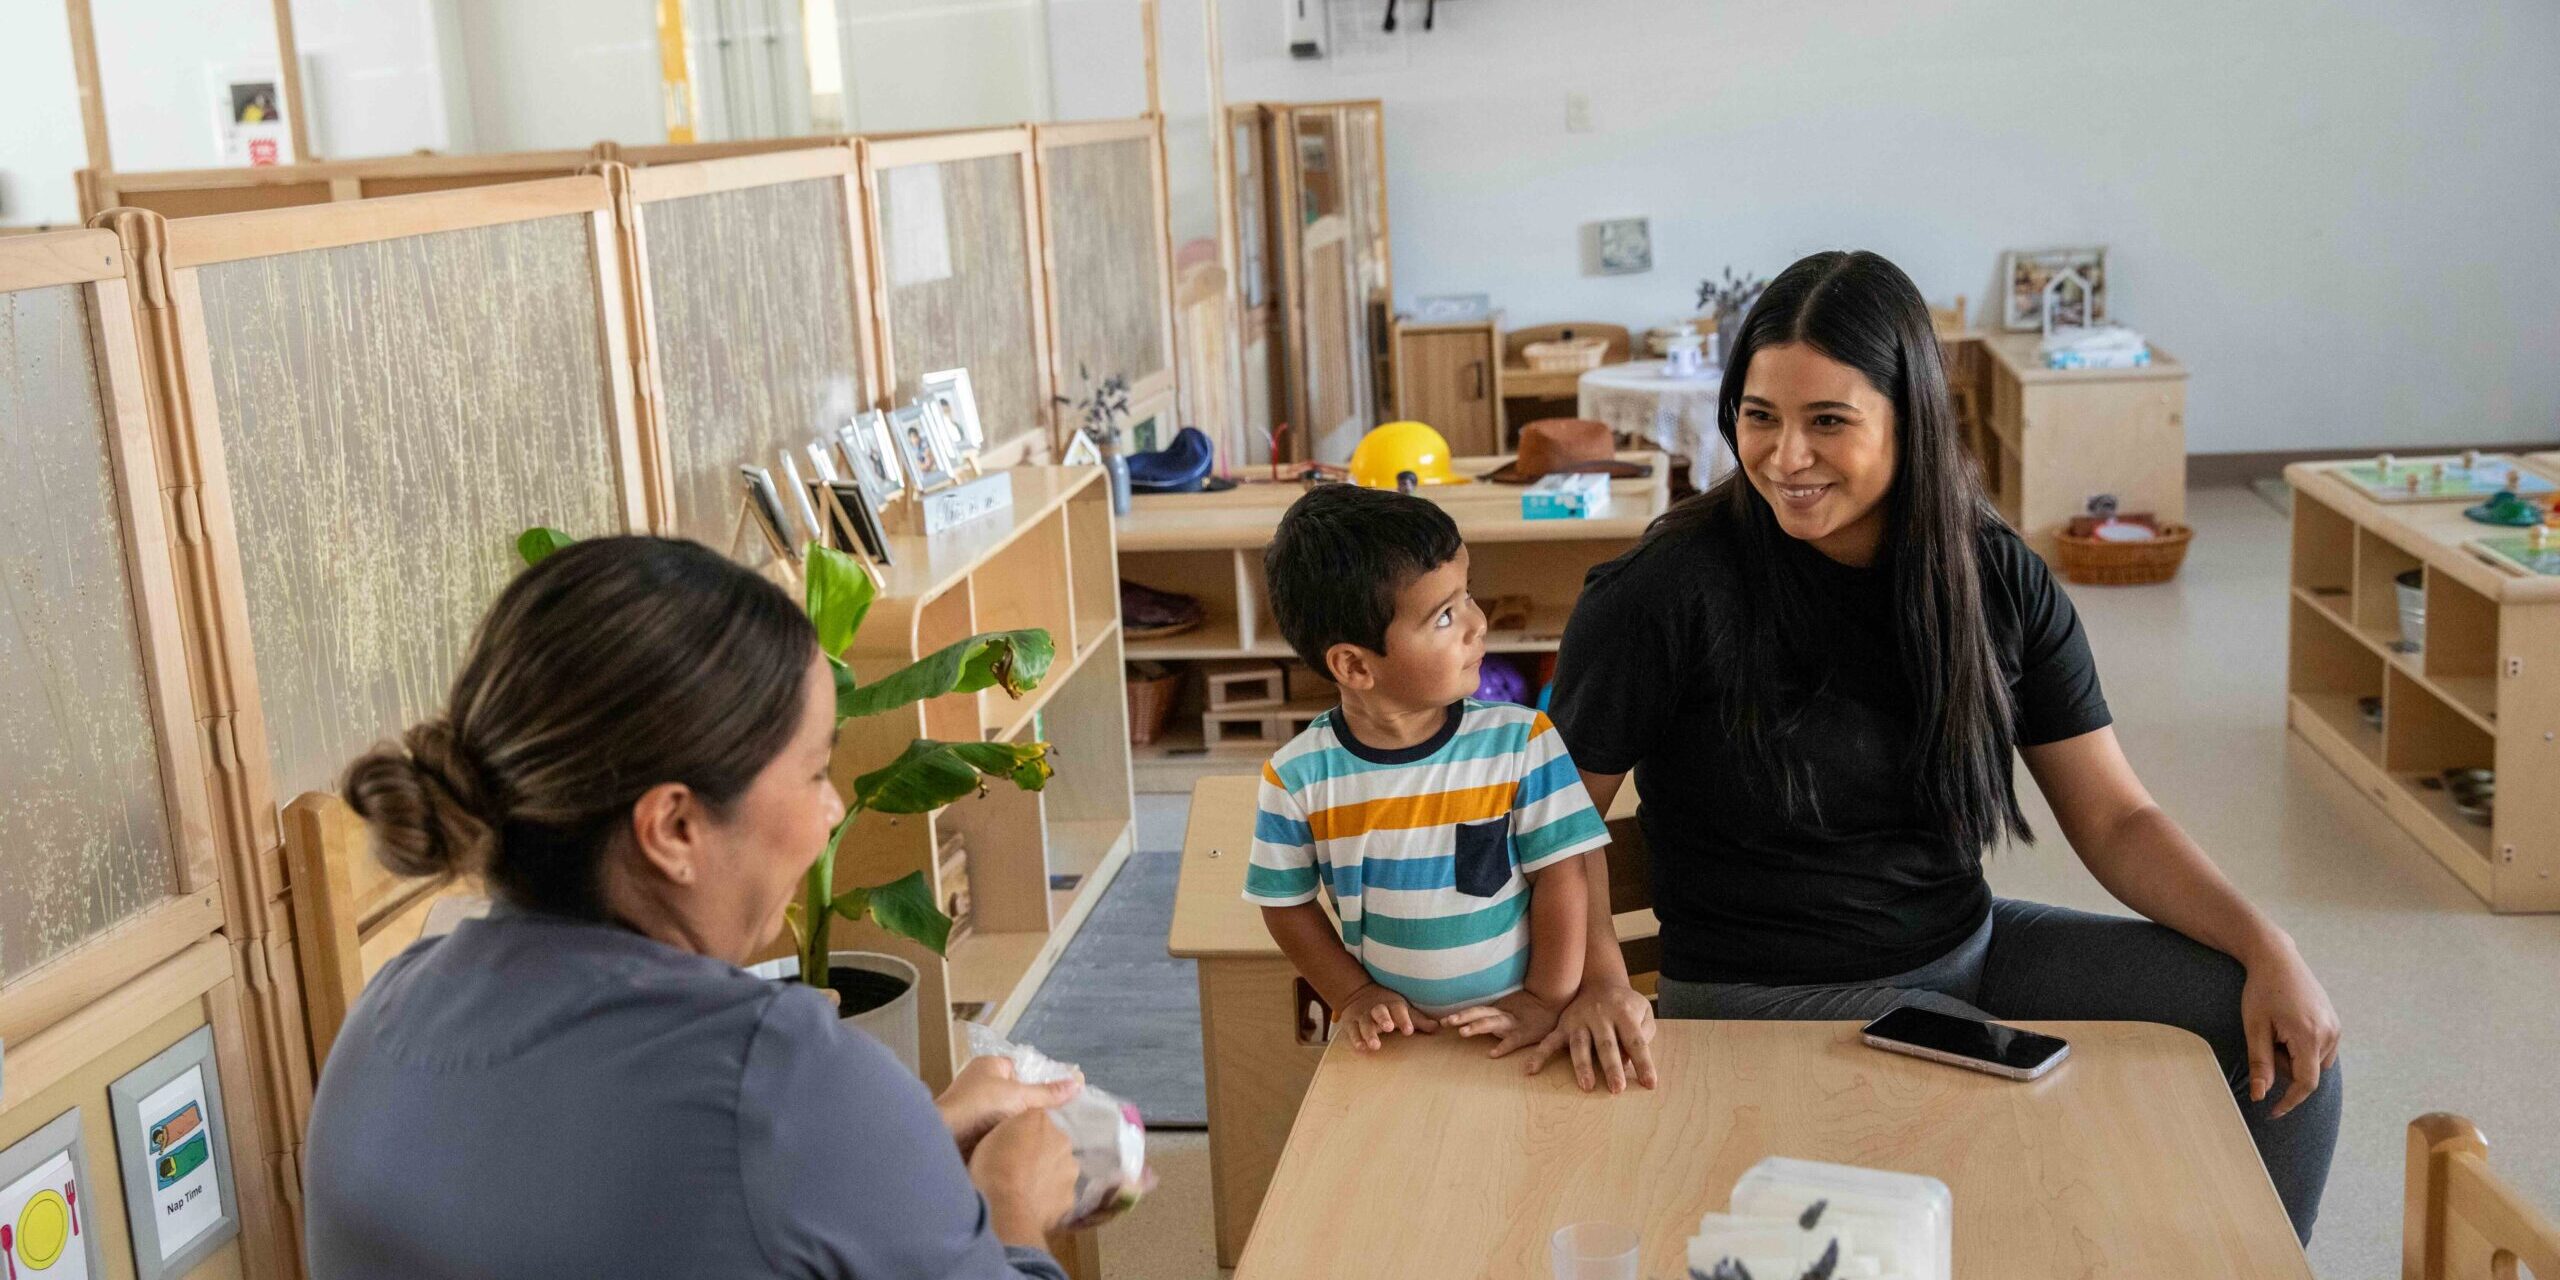 <h2 style="color:#ffffff">The Work</h2><p><span style="font-weight: 400; font-size: 17px;">NHSA's State Affairs’ works to grow the capacity of Head Start Associations to effectively advocate for Head Start programs and the children & families they serve.</p>